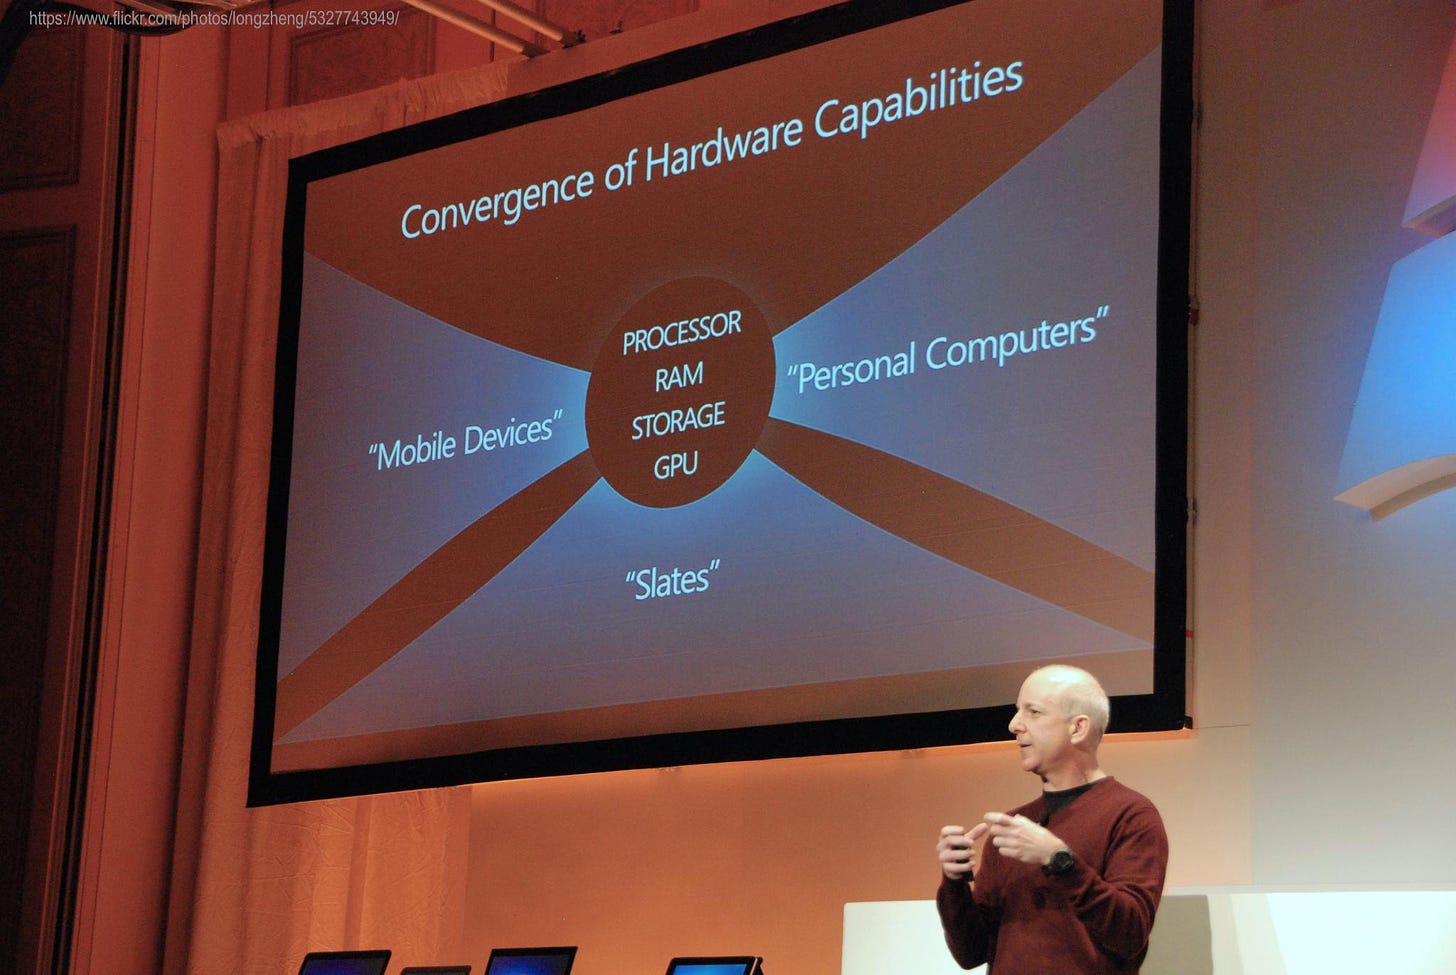 Author on stage with a slide showing how hardware capabilities are converging: processor/RAM/storage/GPU for mobile devices, personal computers, slates.